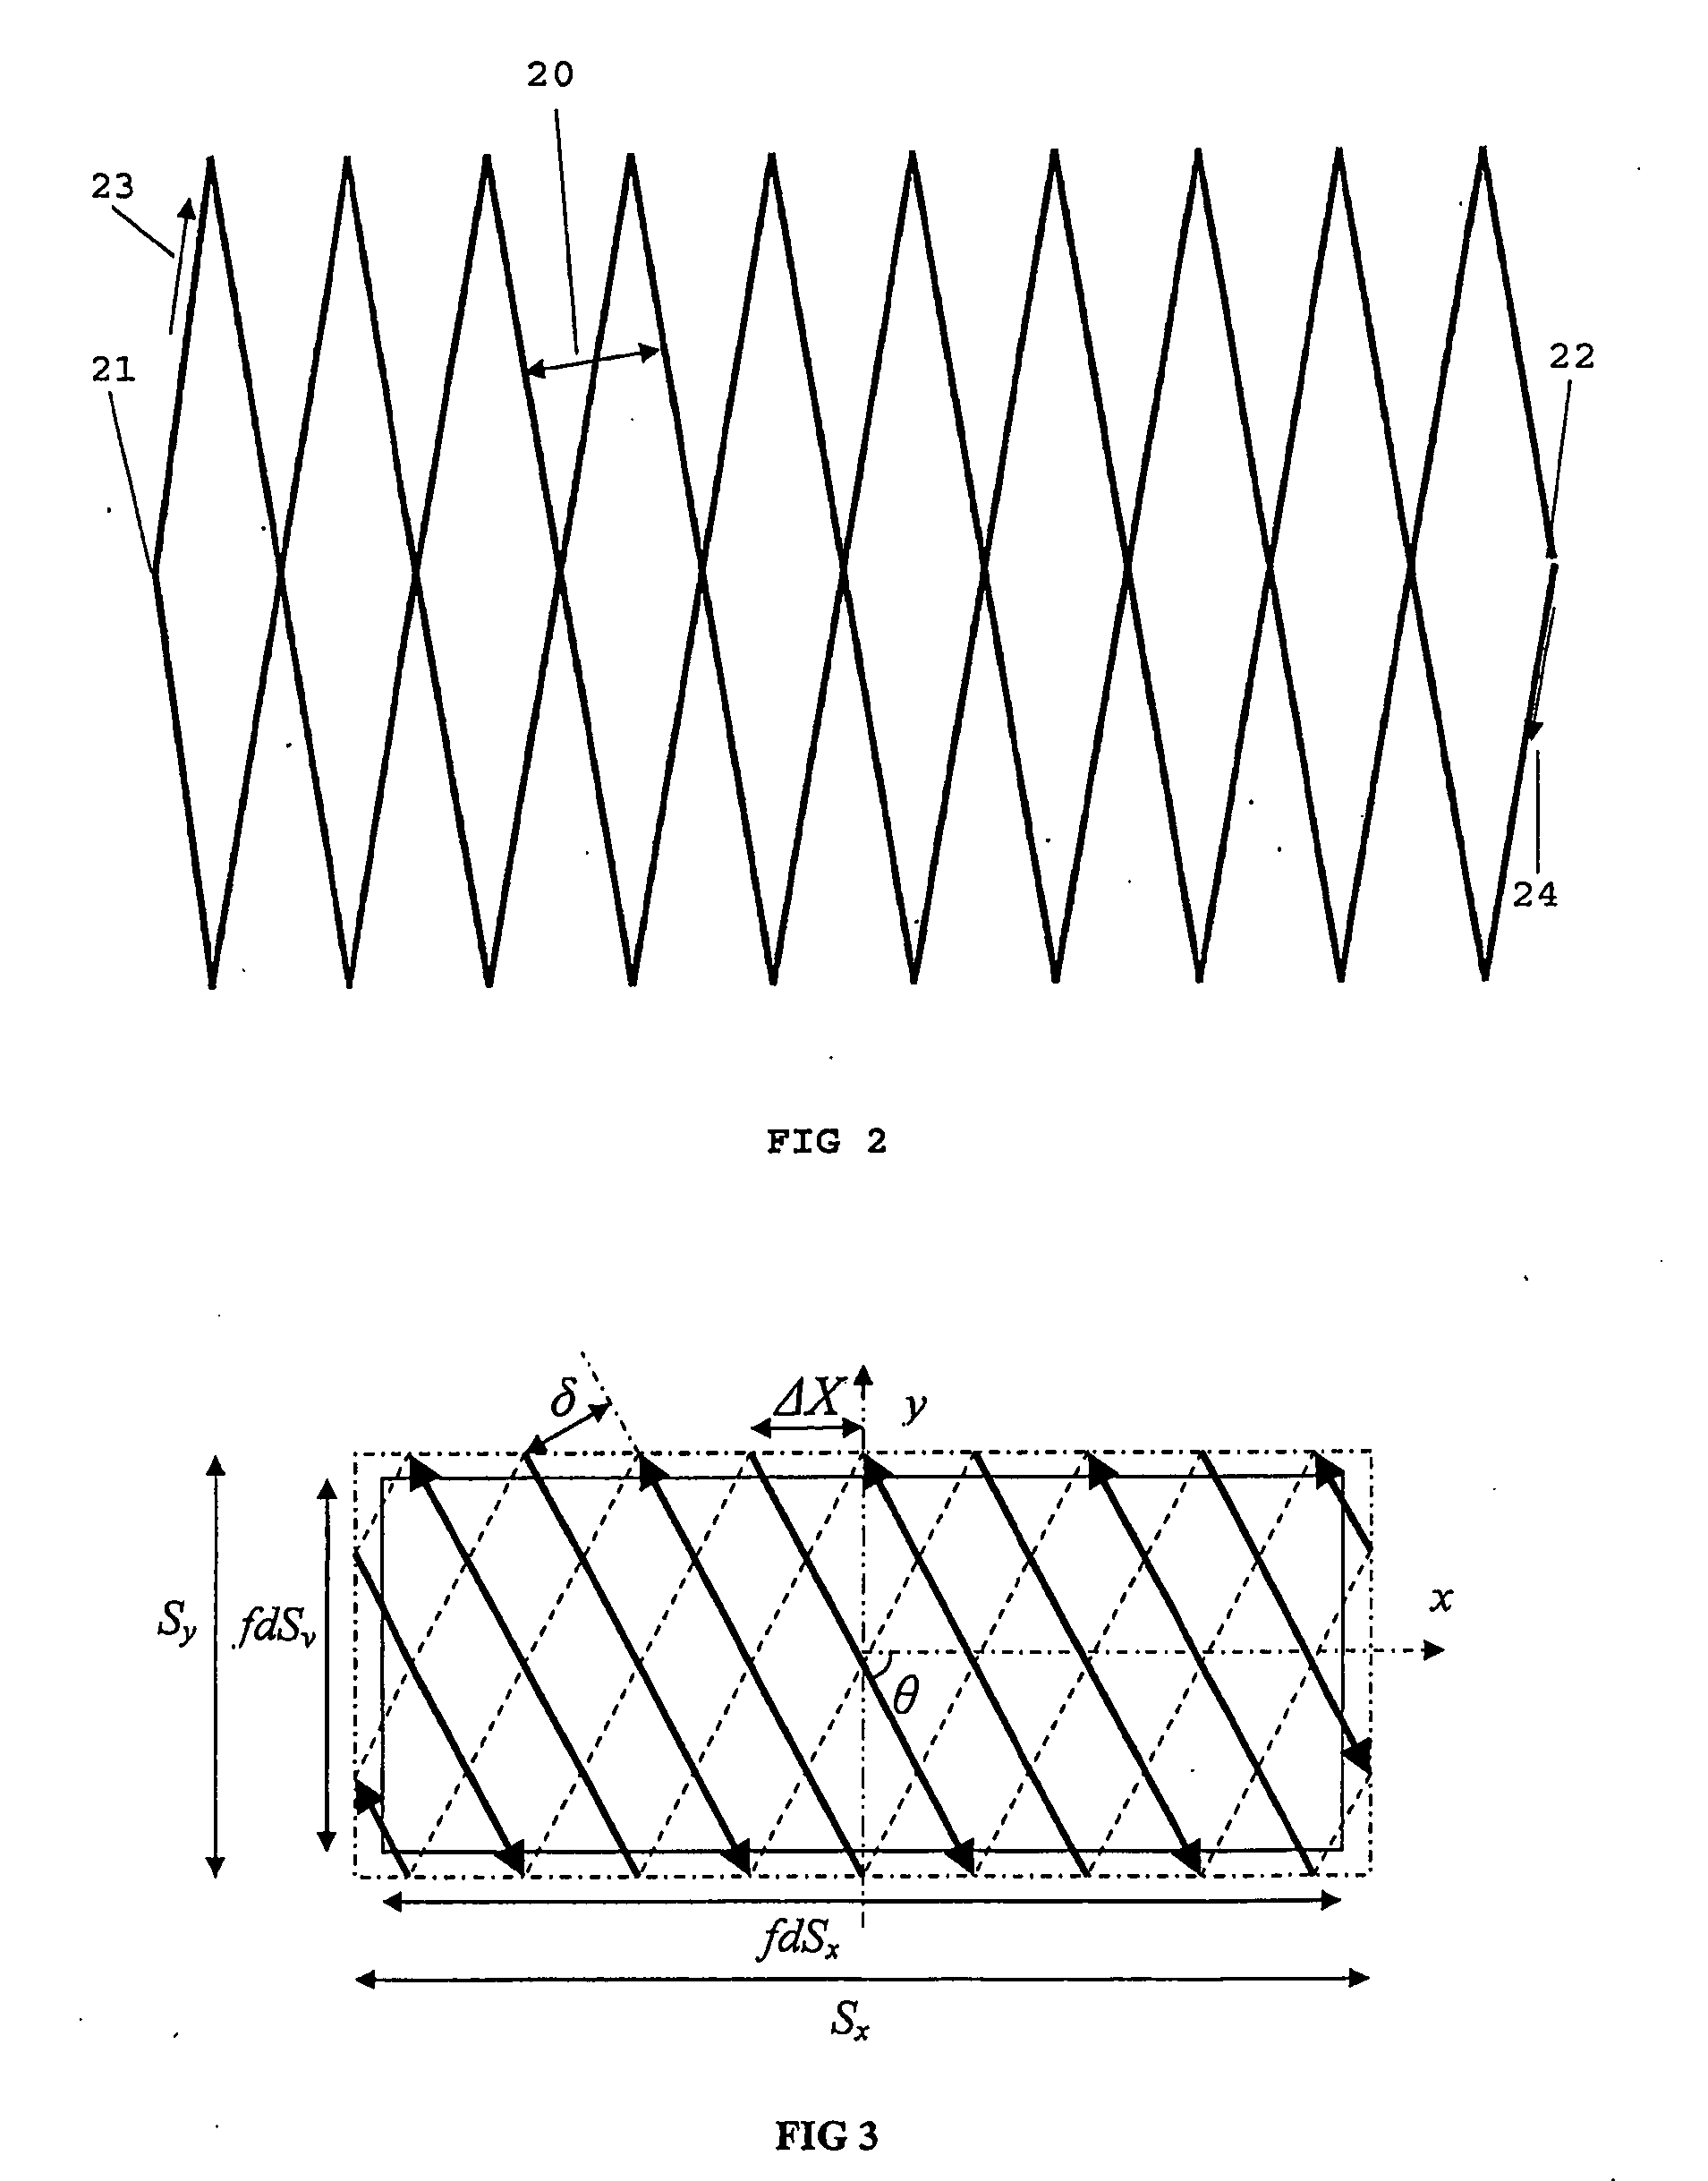 Method And Software For Irradiating A Target Volume With A Particle Beam And Device Implementing Same